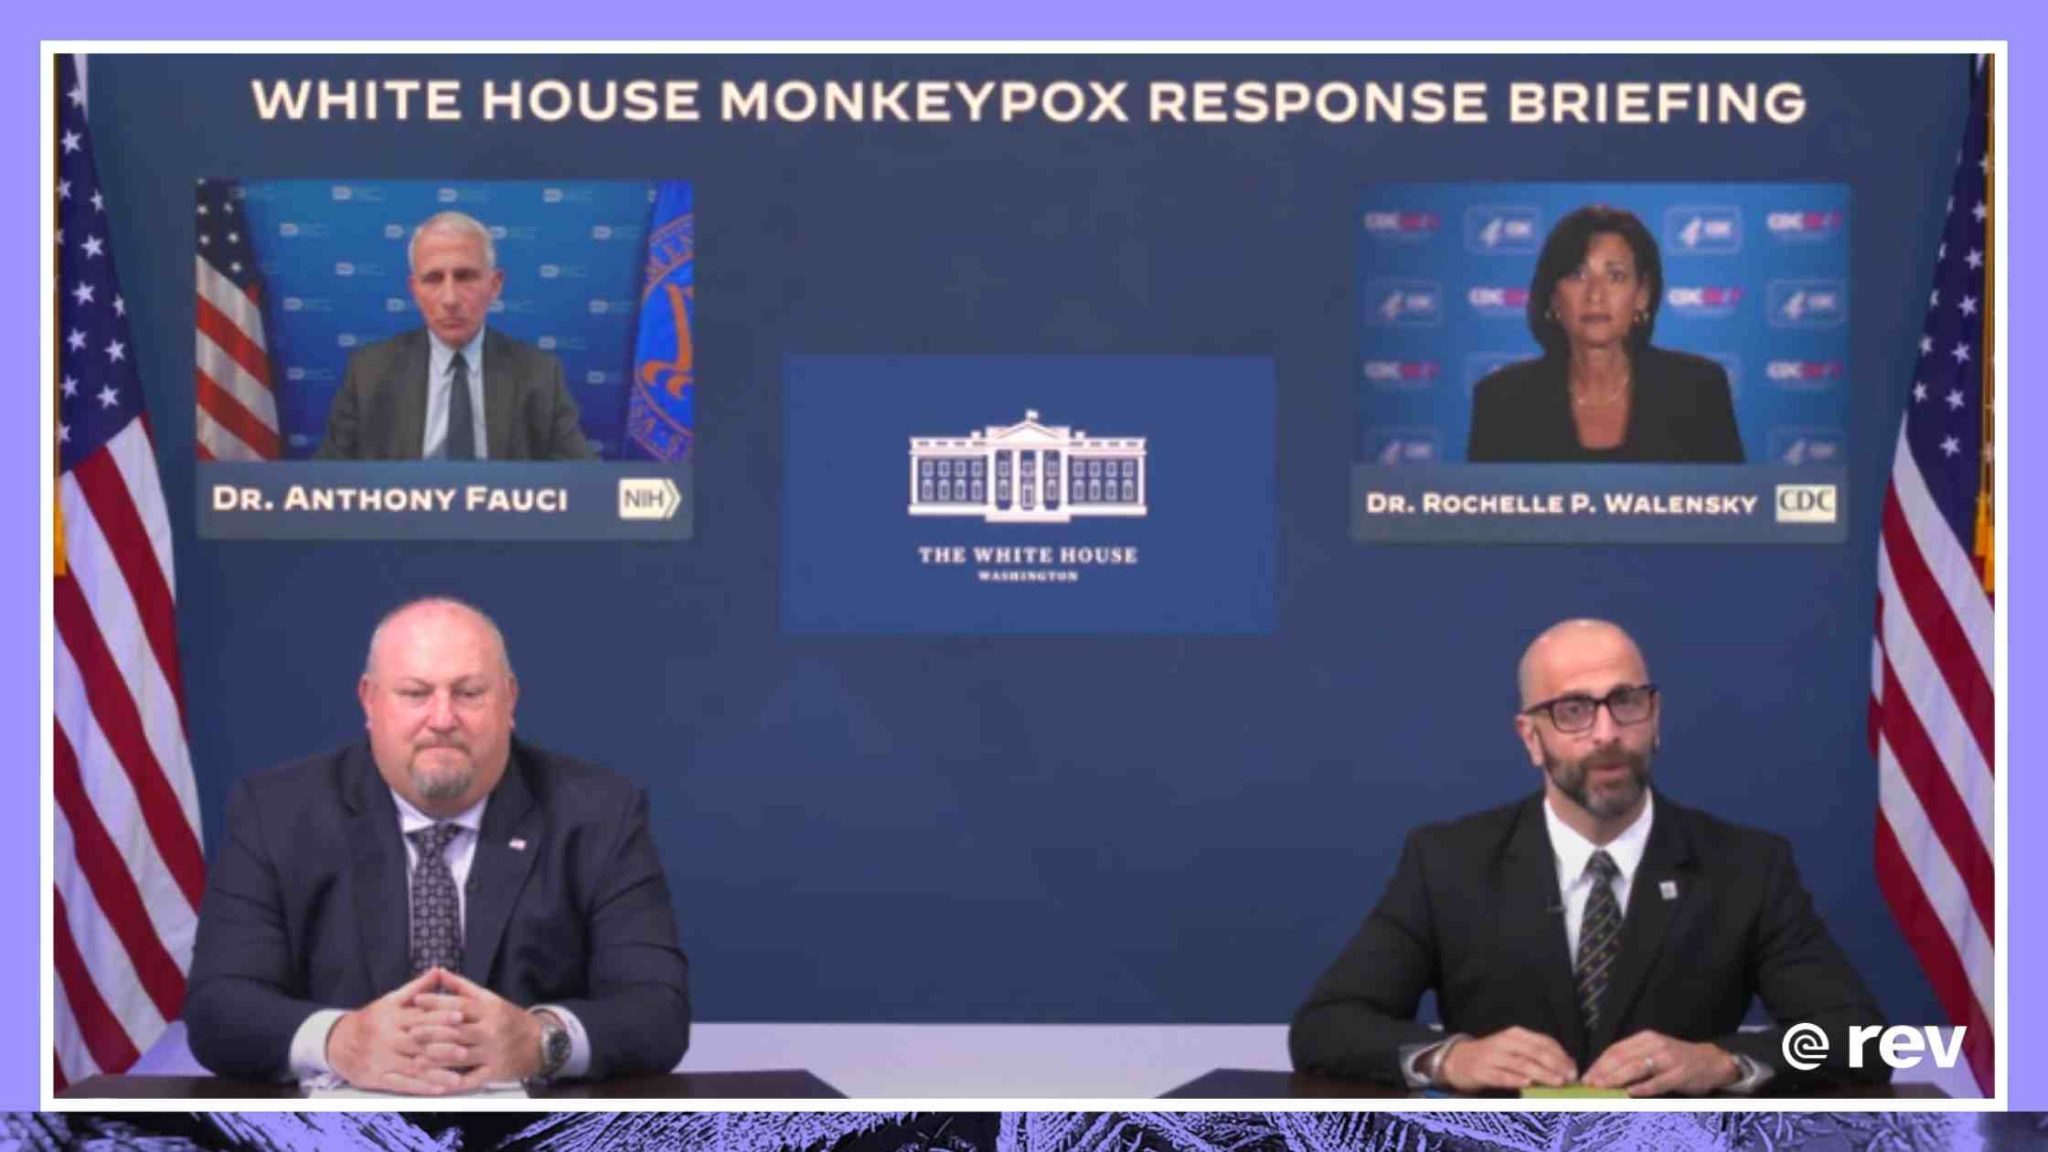 Press Briefing by White House Monkeypox Response Team and Public Health Officials 9/15/22 Transcript